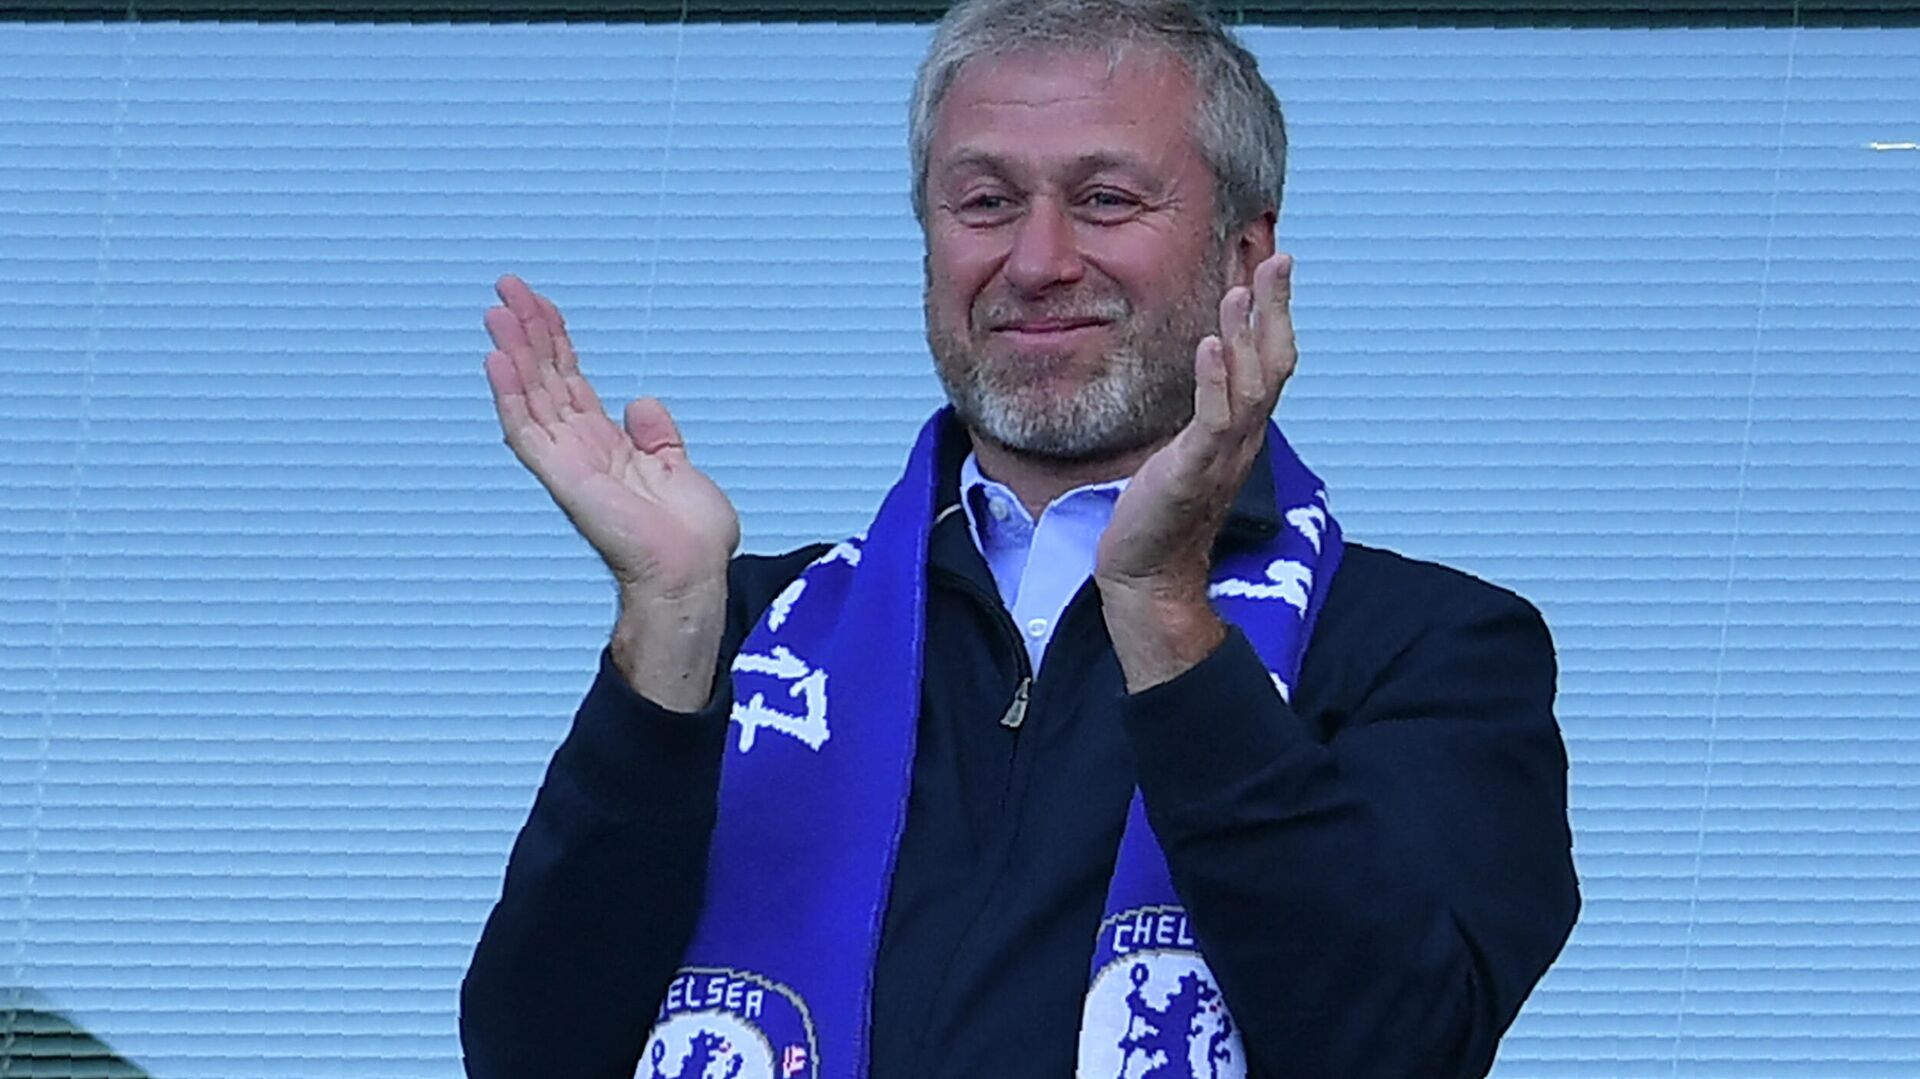 Chelsea's Russian owner Roman Abramovich applauds, as players celebrate their league title win at the end of the Premier League football match between Chelsea and Sunderland at Stamford Bridge in London. - Sputnik International, 1920, 10.03.2022